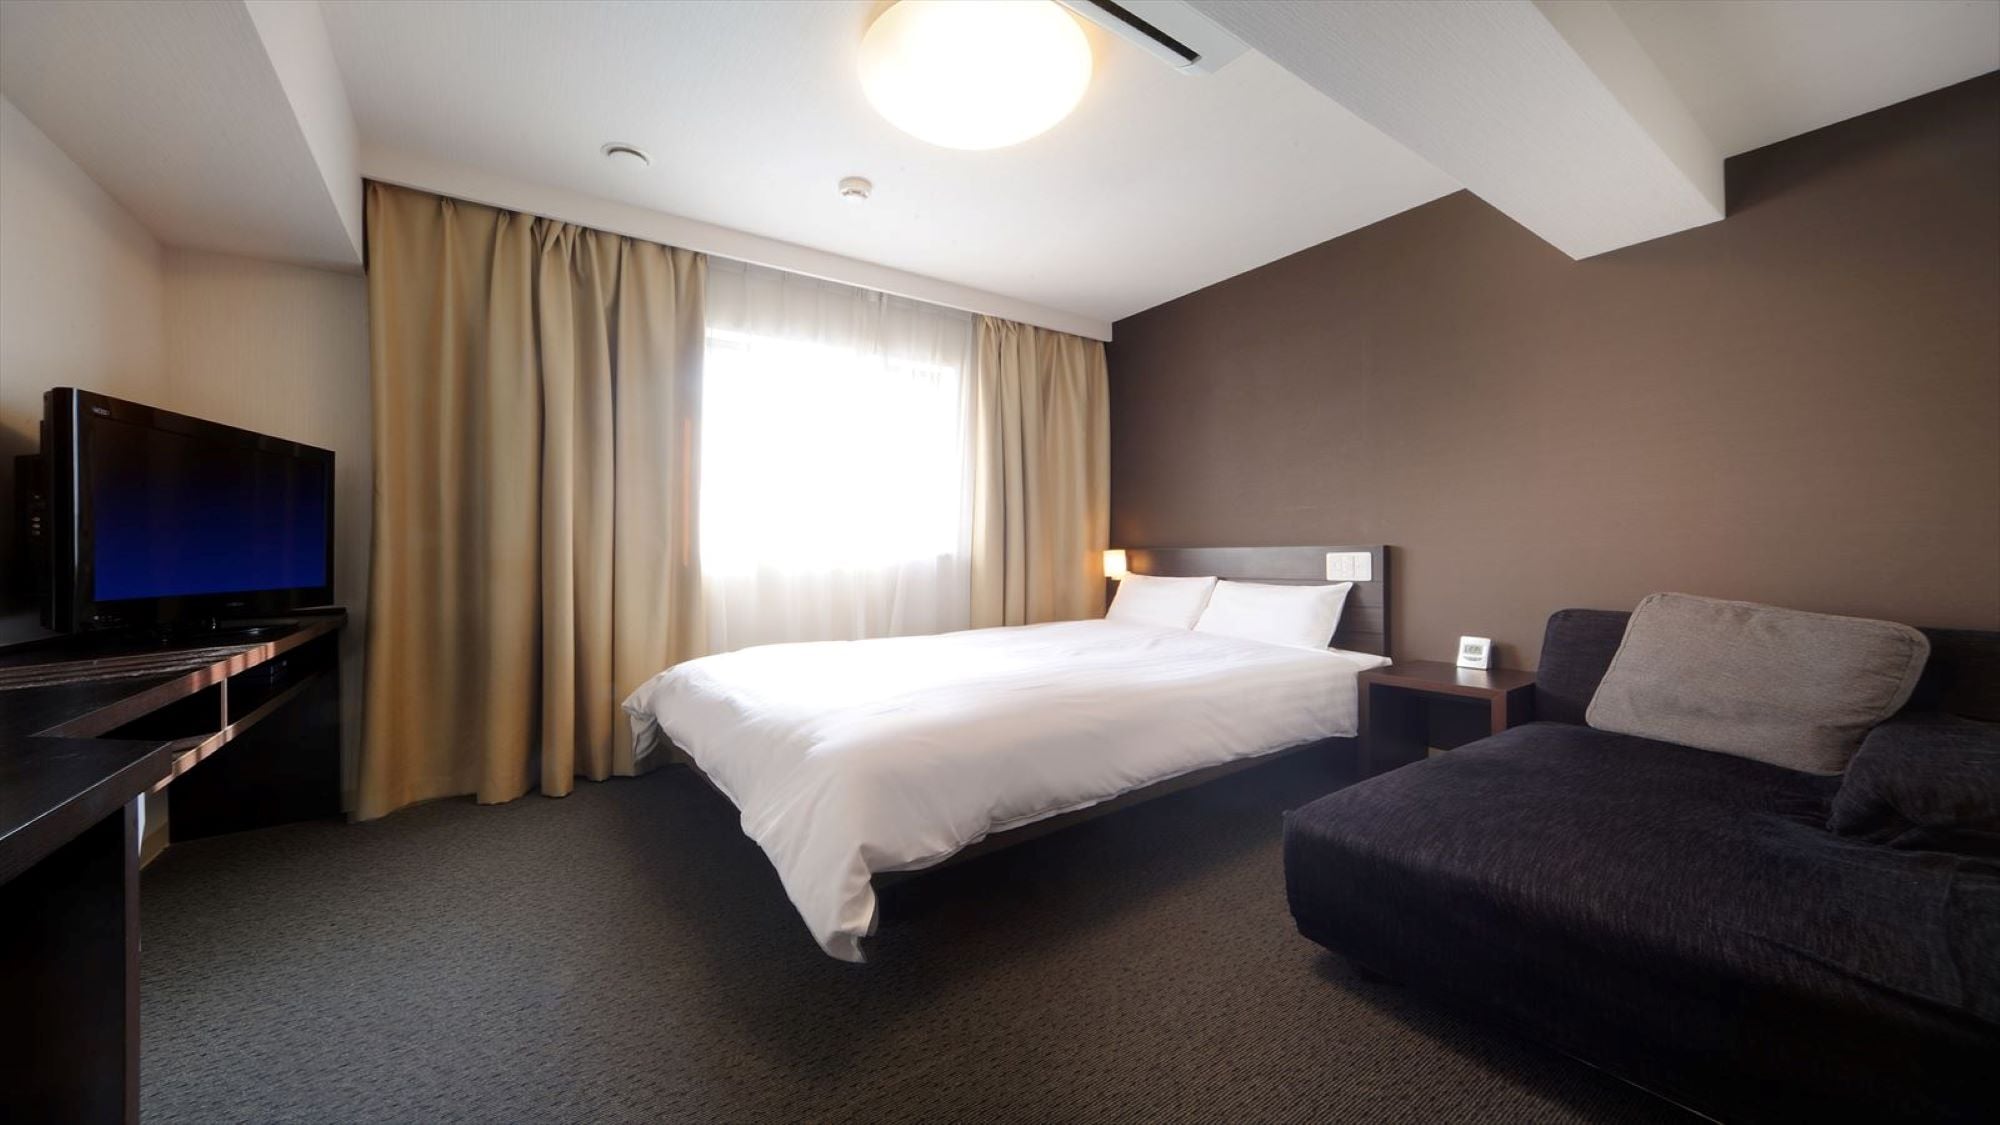 ◆ Non-smoking deluxe room 18 square meters bed 140 cm & times; 195 cm * Some types do not have a sofa